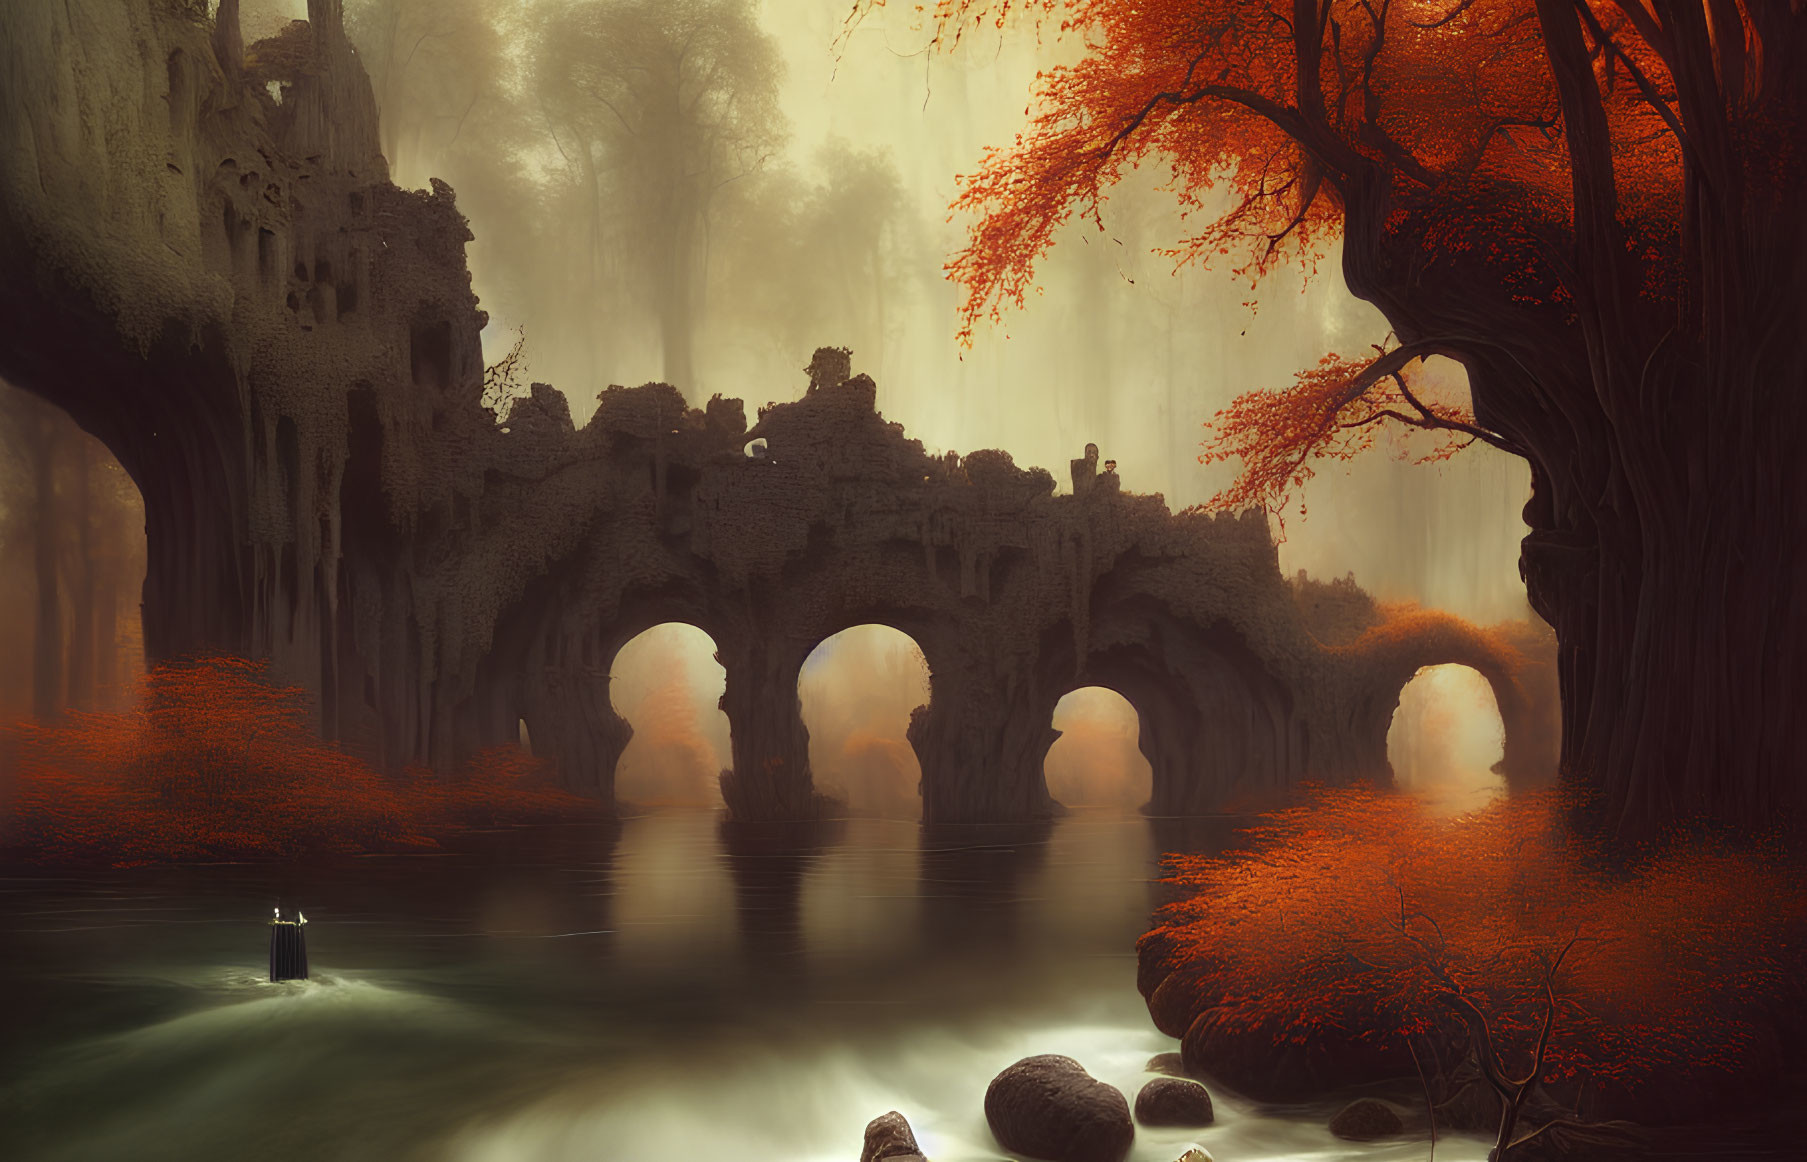 Tranquil river under stone arches in misty autumn forest